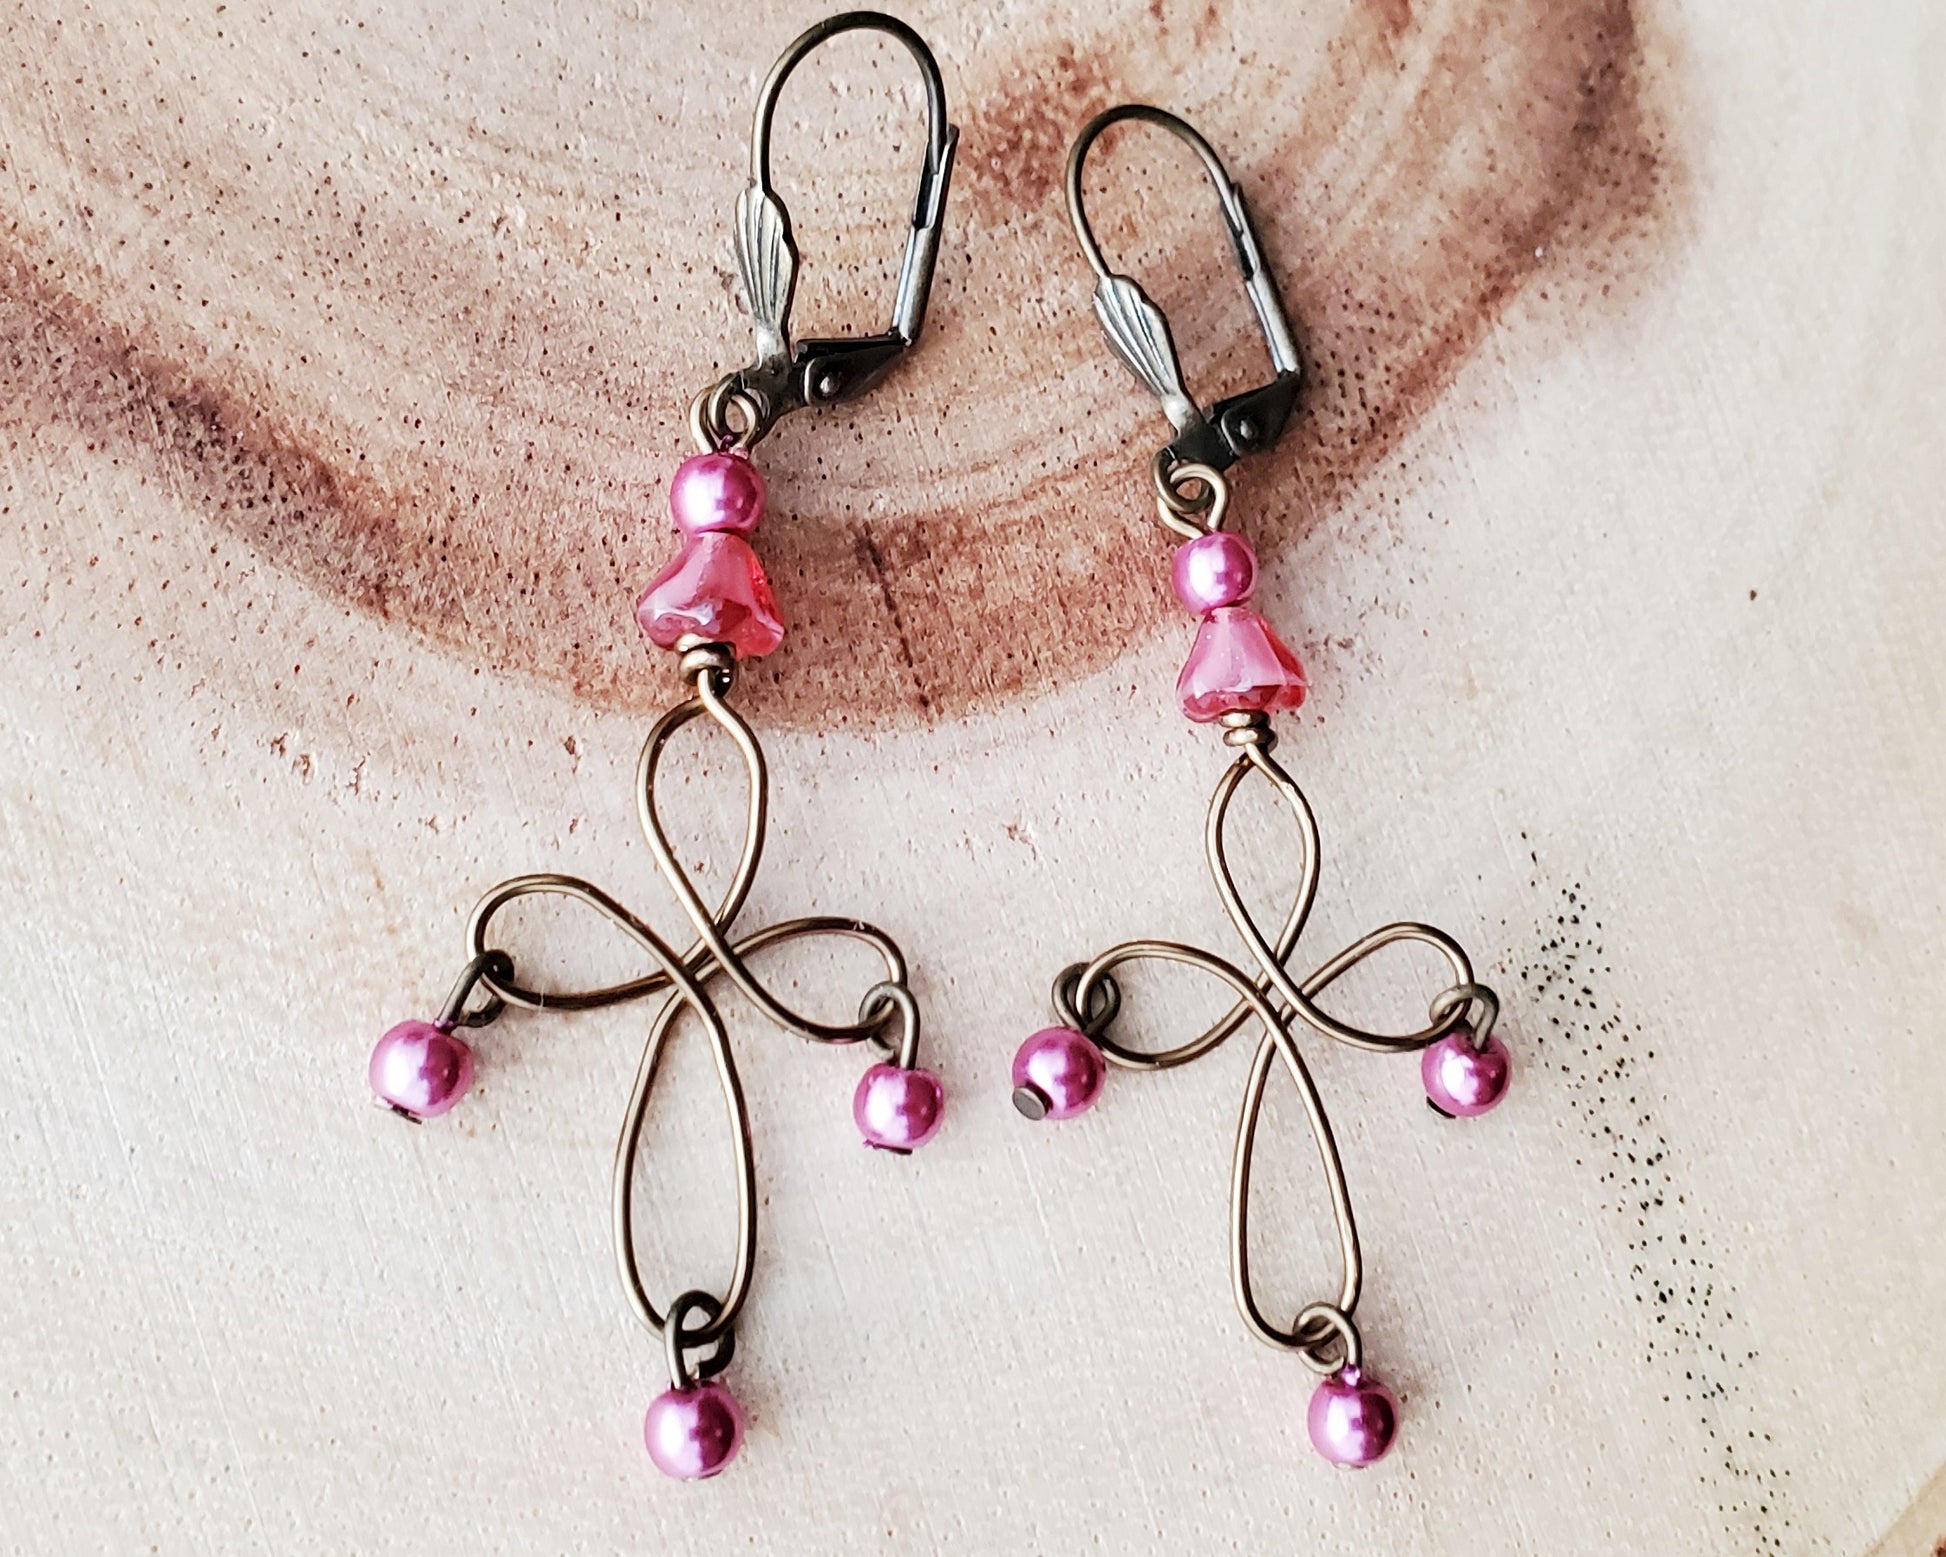 Long Pink Floral Cross Earrings, Vintage Inspired with Large Hand forged Antique Brass Cross, pink Pearls and Flowers with leaver back earring hooks